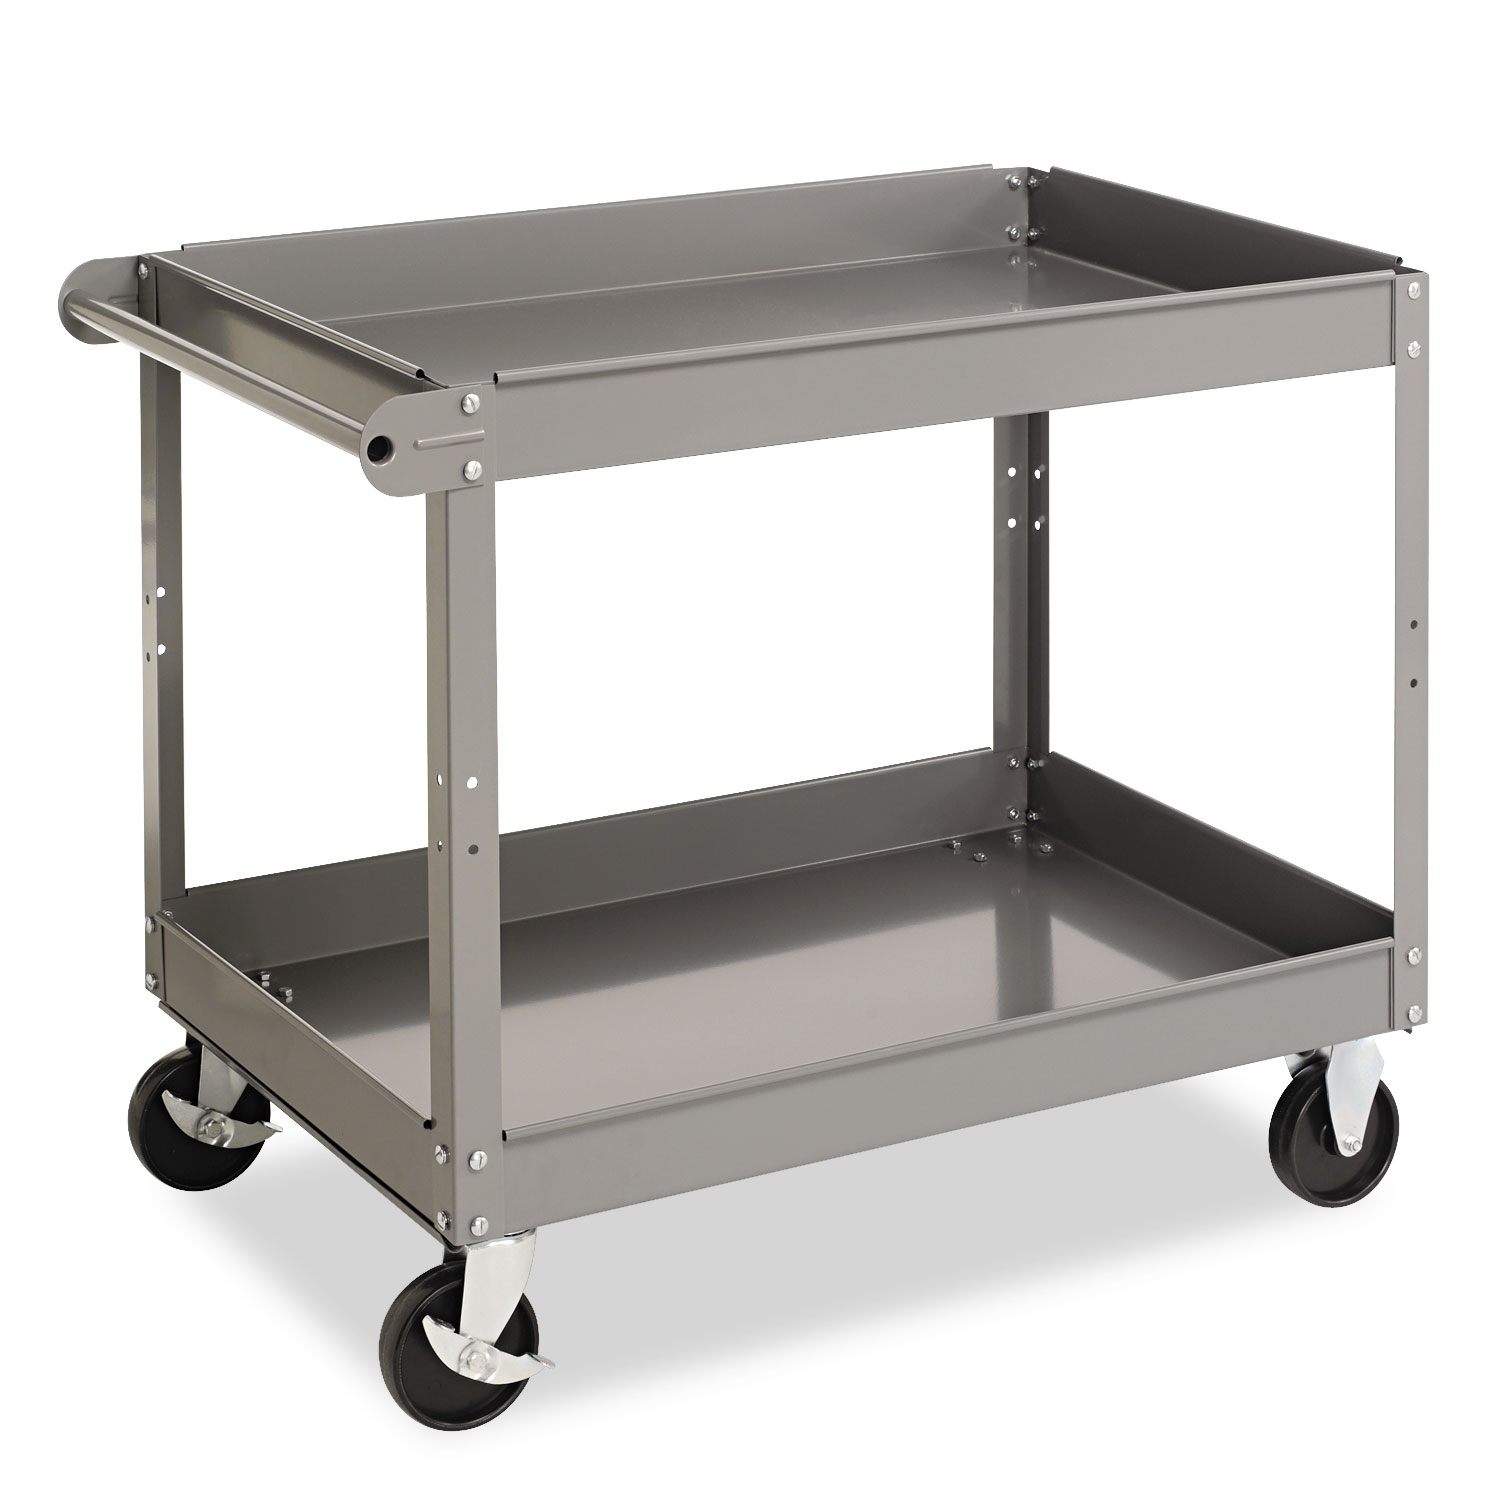 Large Utility Cart, Heavy Duty Cart Holds up to 500 lbs, 2-Shelf Rolling  Cart